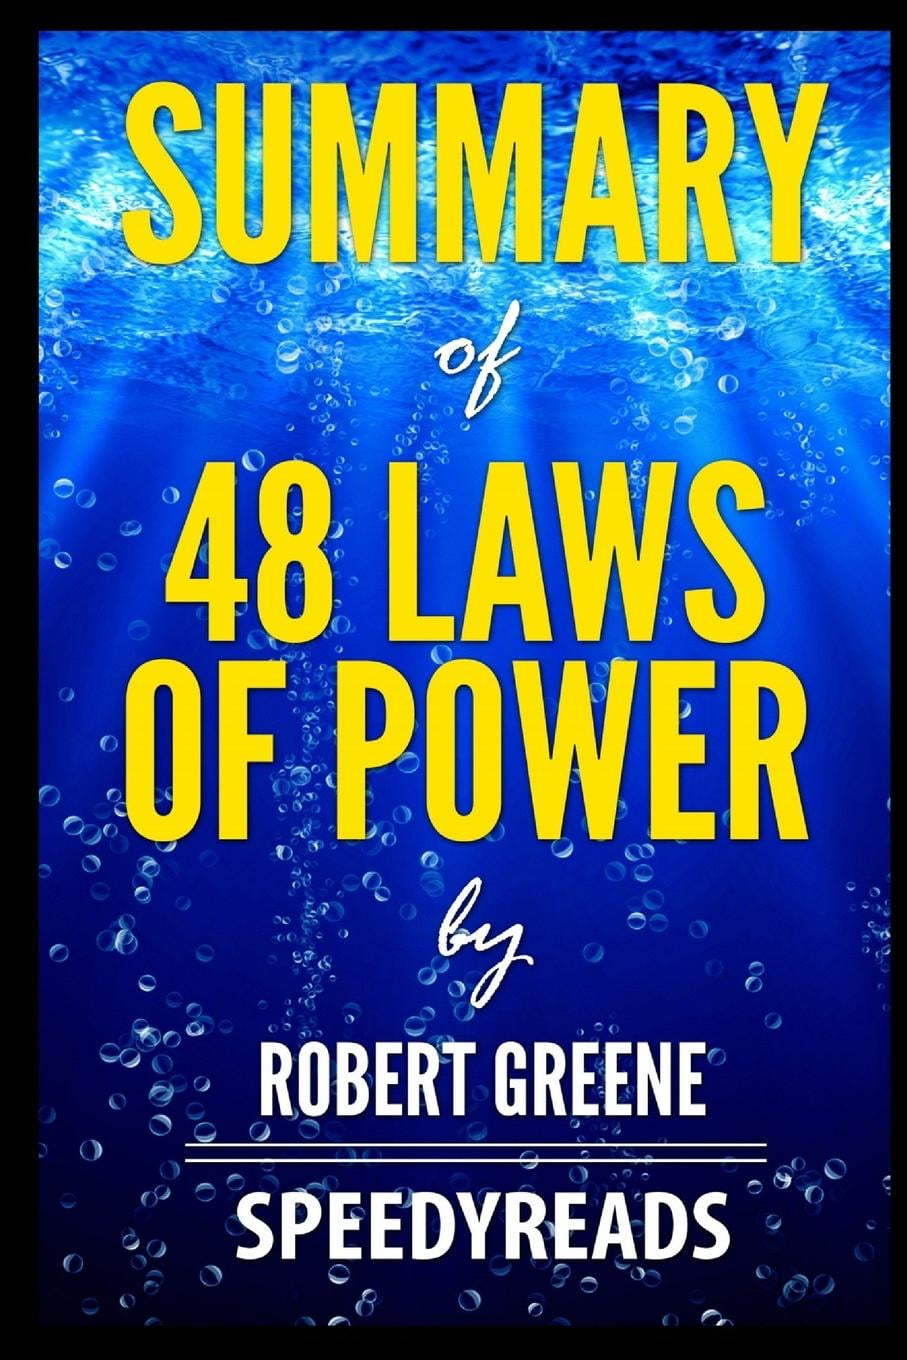 48 laws of power poster